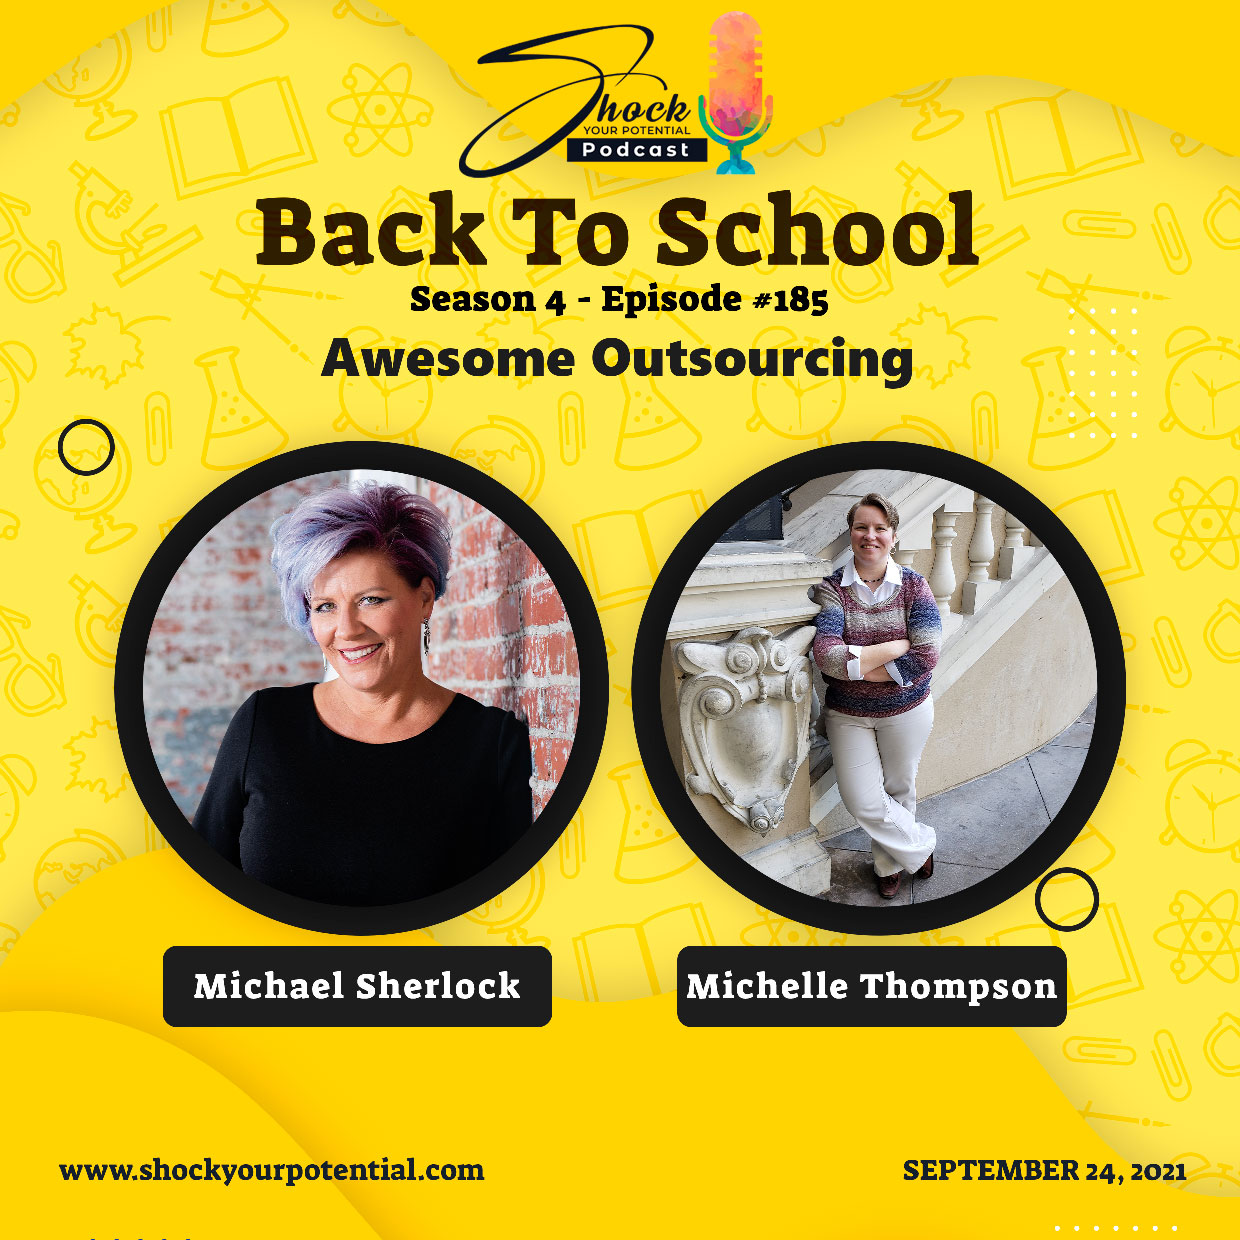 Awesome Outsourcing – Michelle Thompson